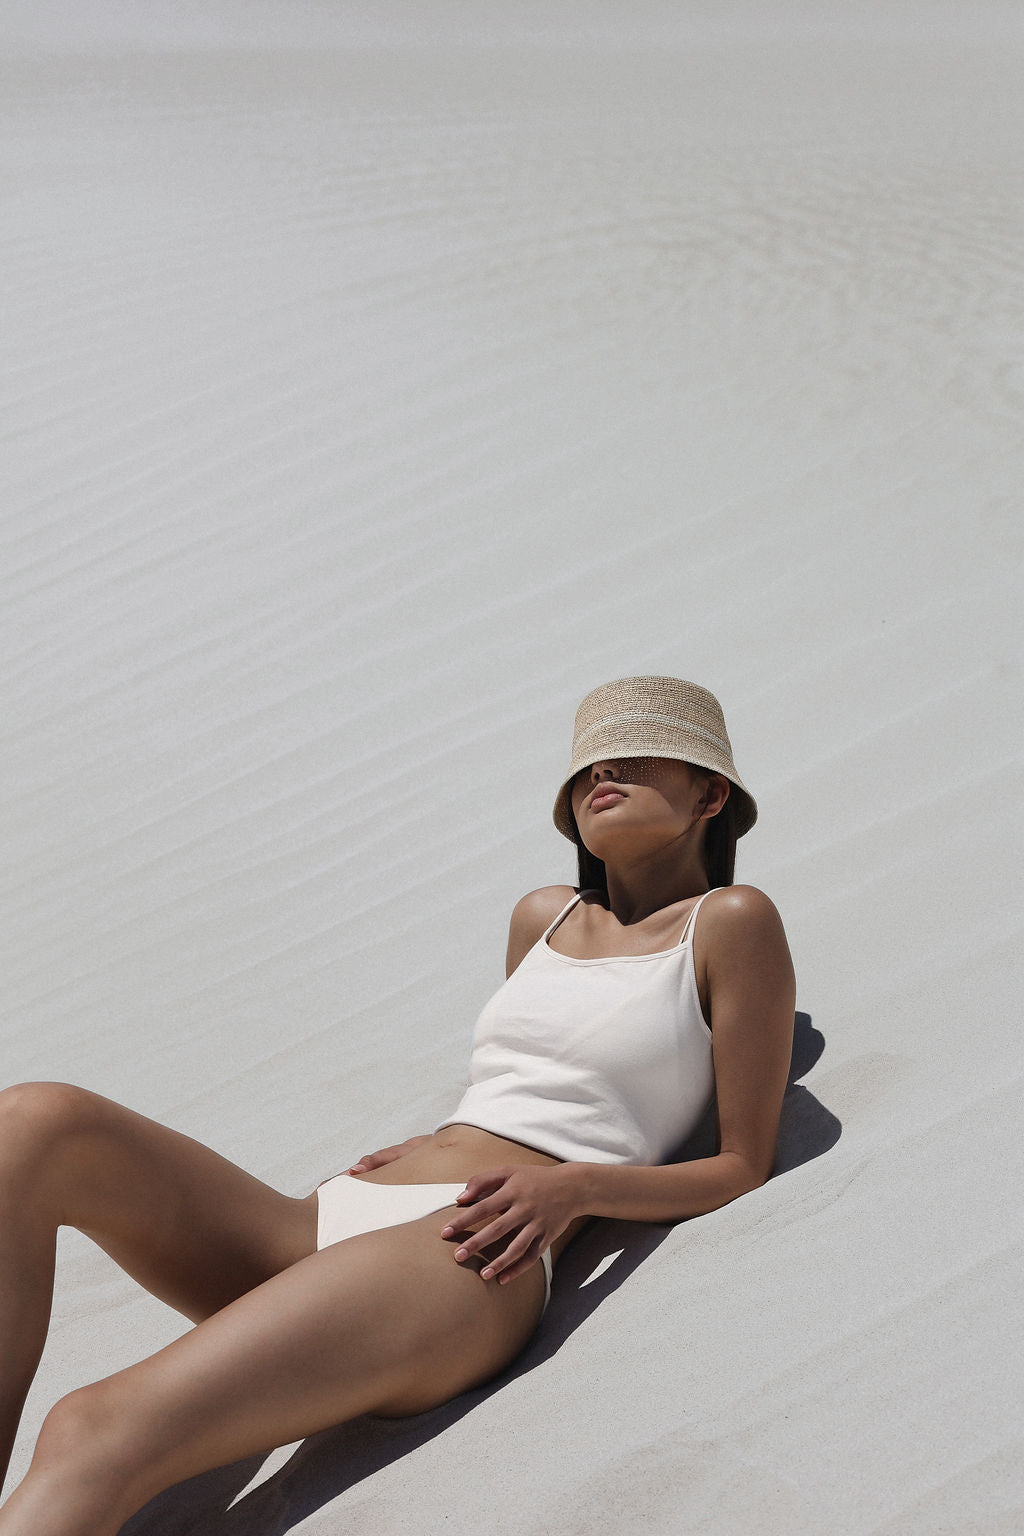 Lila Bucket Hat - Sand & Natural